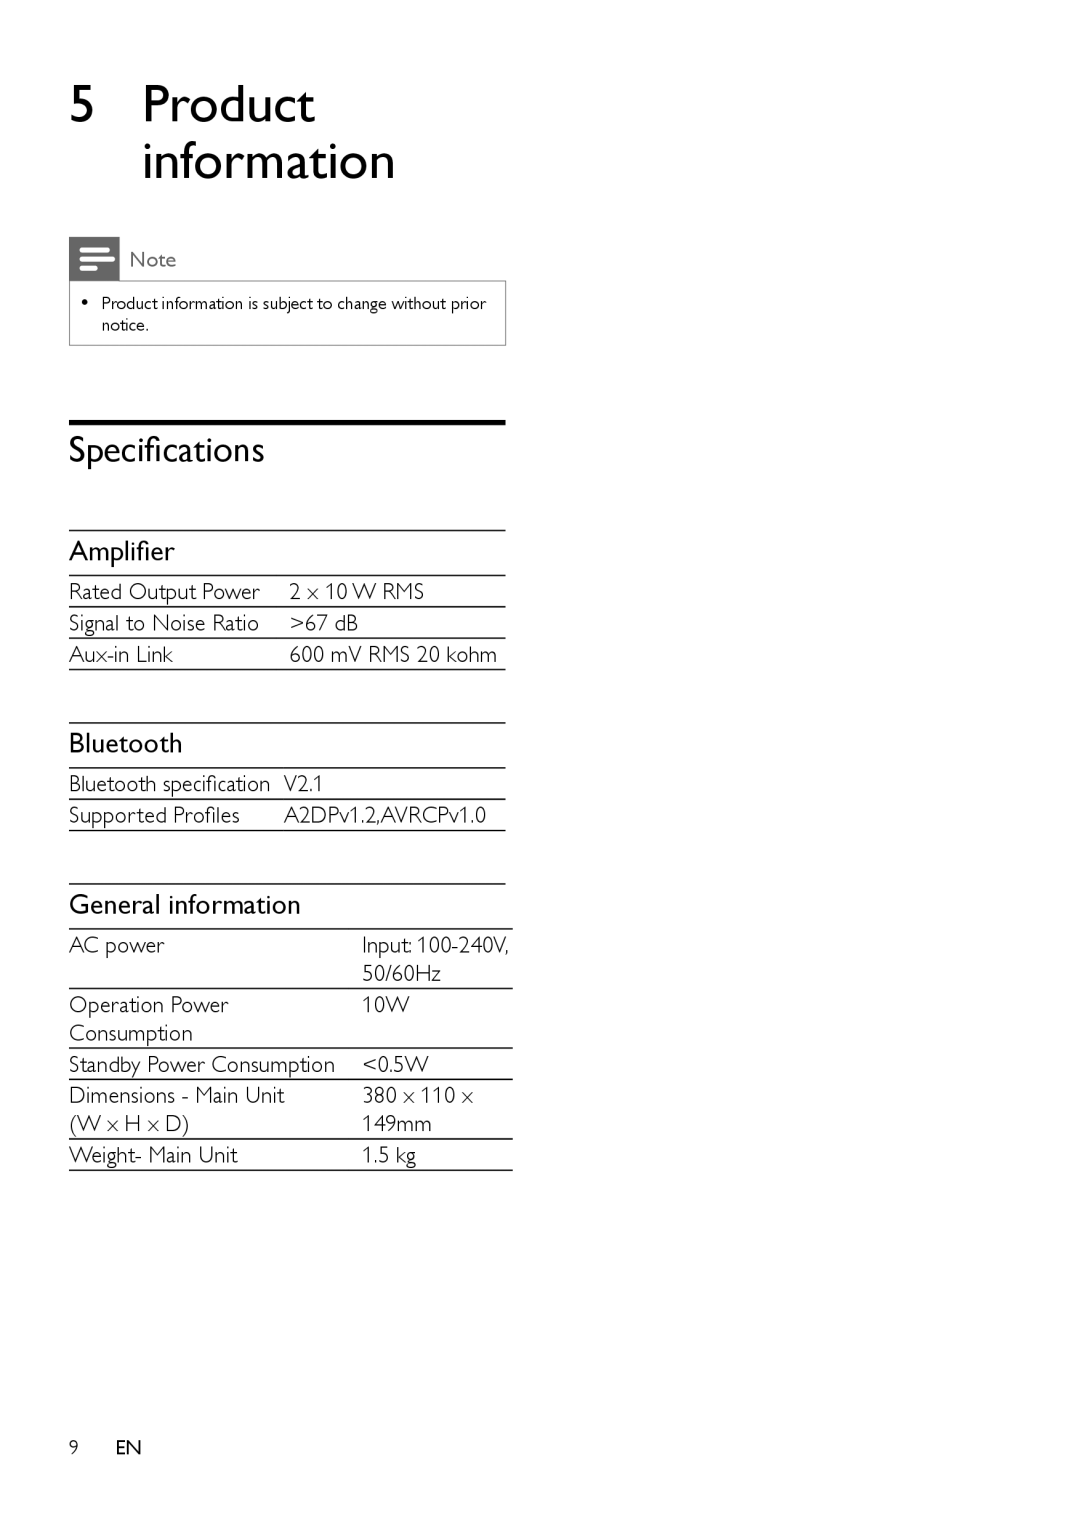 Philips SBT550WHI/12 user manual 5Product information, Specifications, Amplifier, Bluetooth, General information 